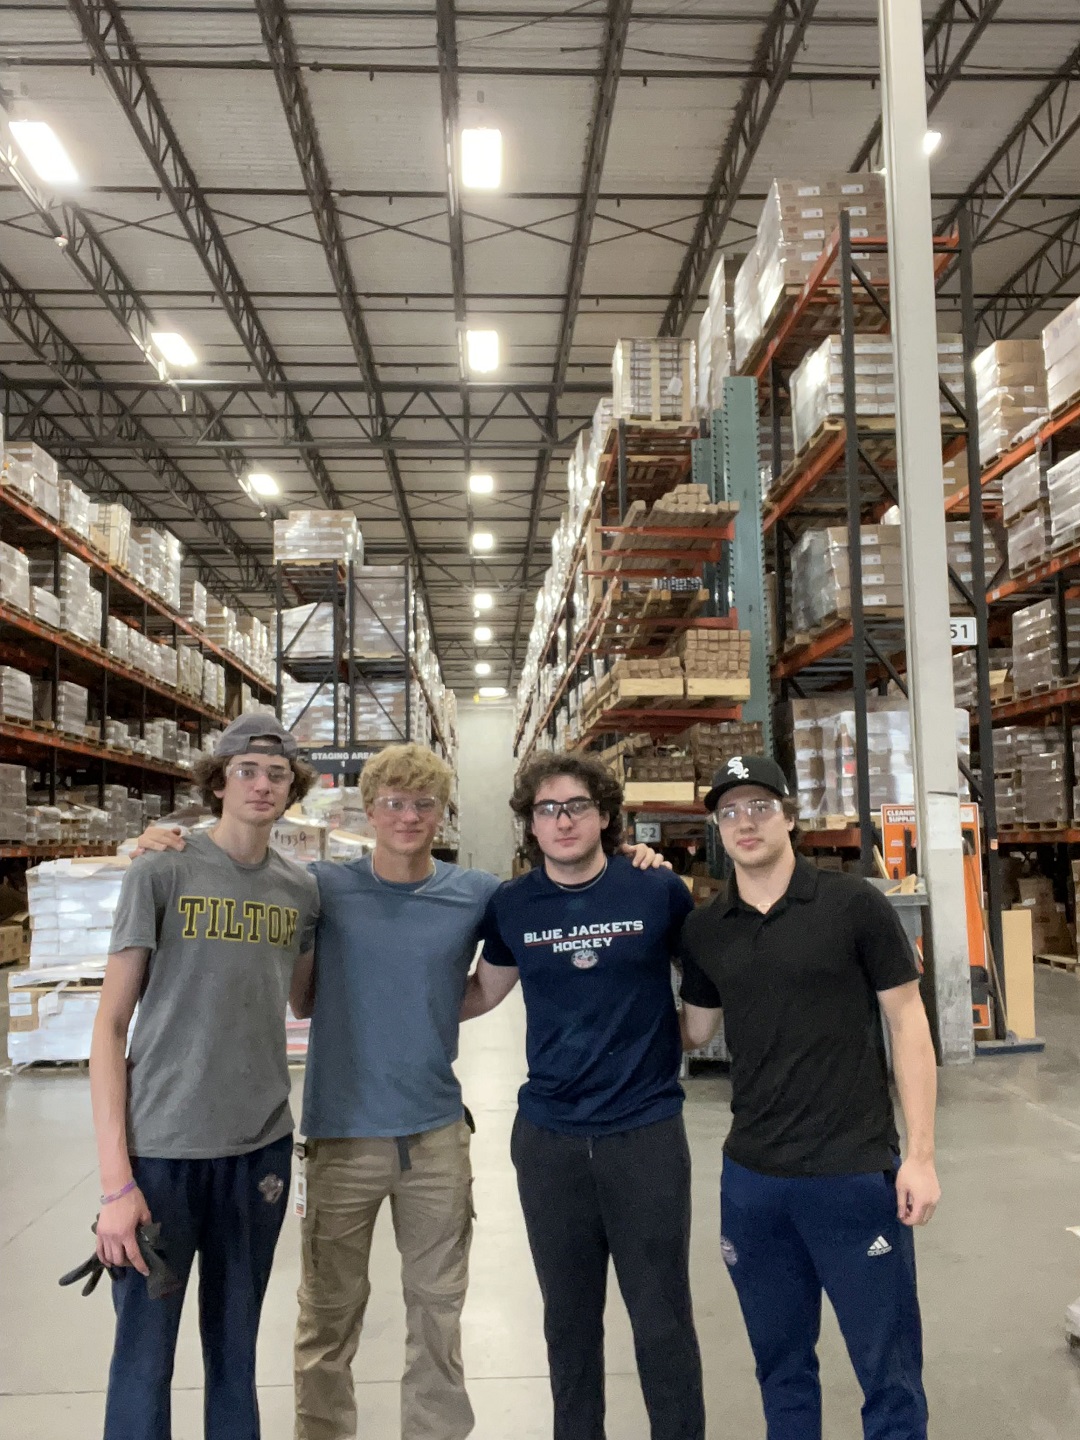 Simpson Strong-Tie Gen Z employees (L to R: Liam Megahan, Nate McBrayer, Jonathan Sonedecker and Kyle Mead)